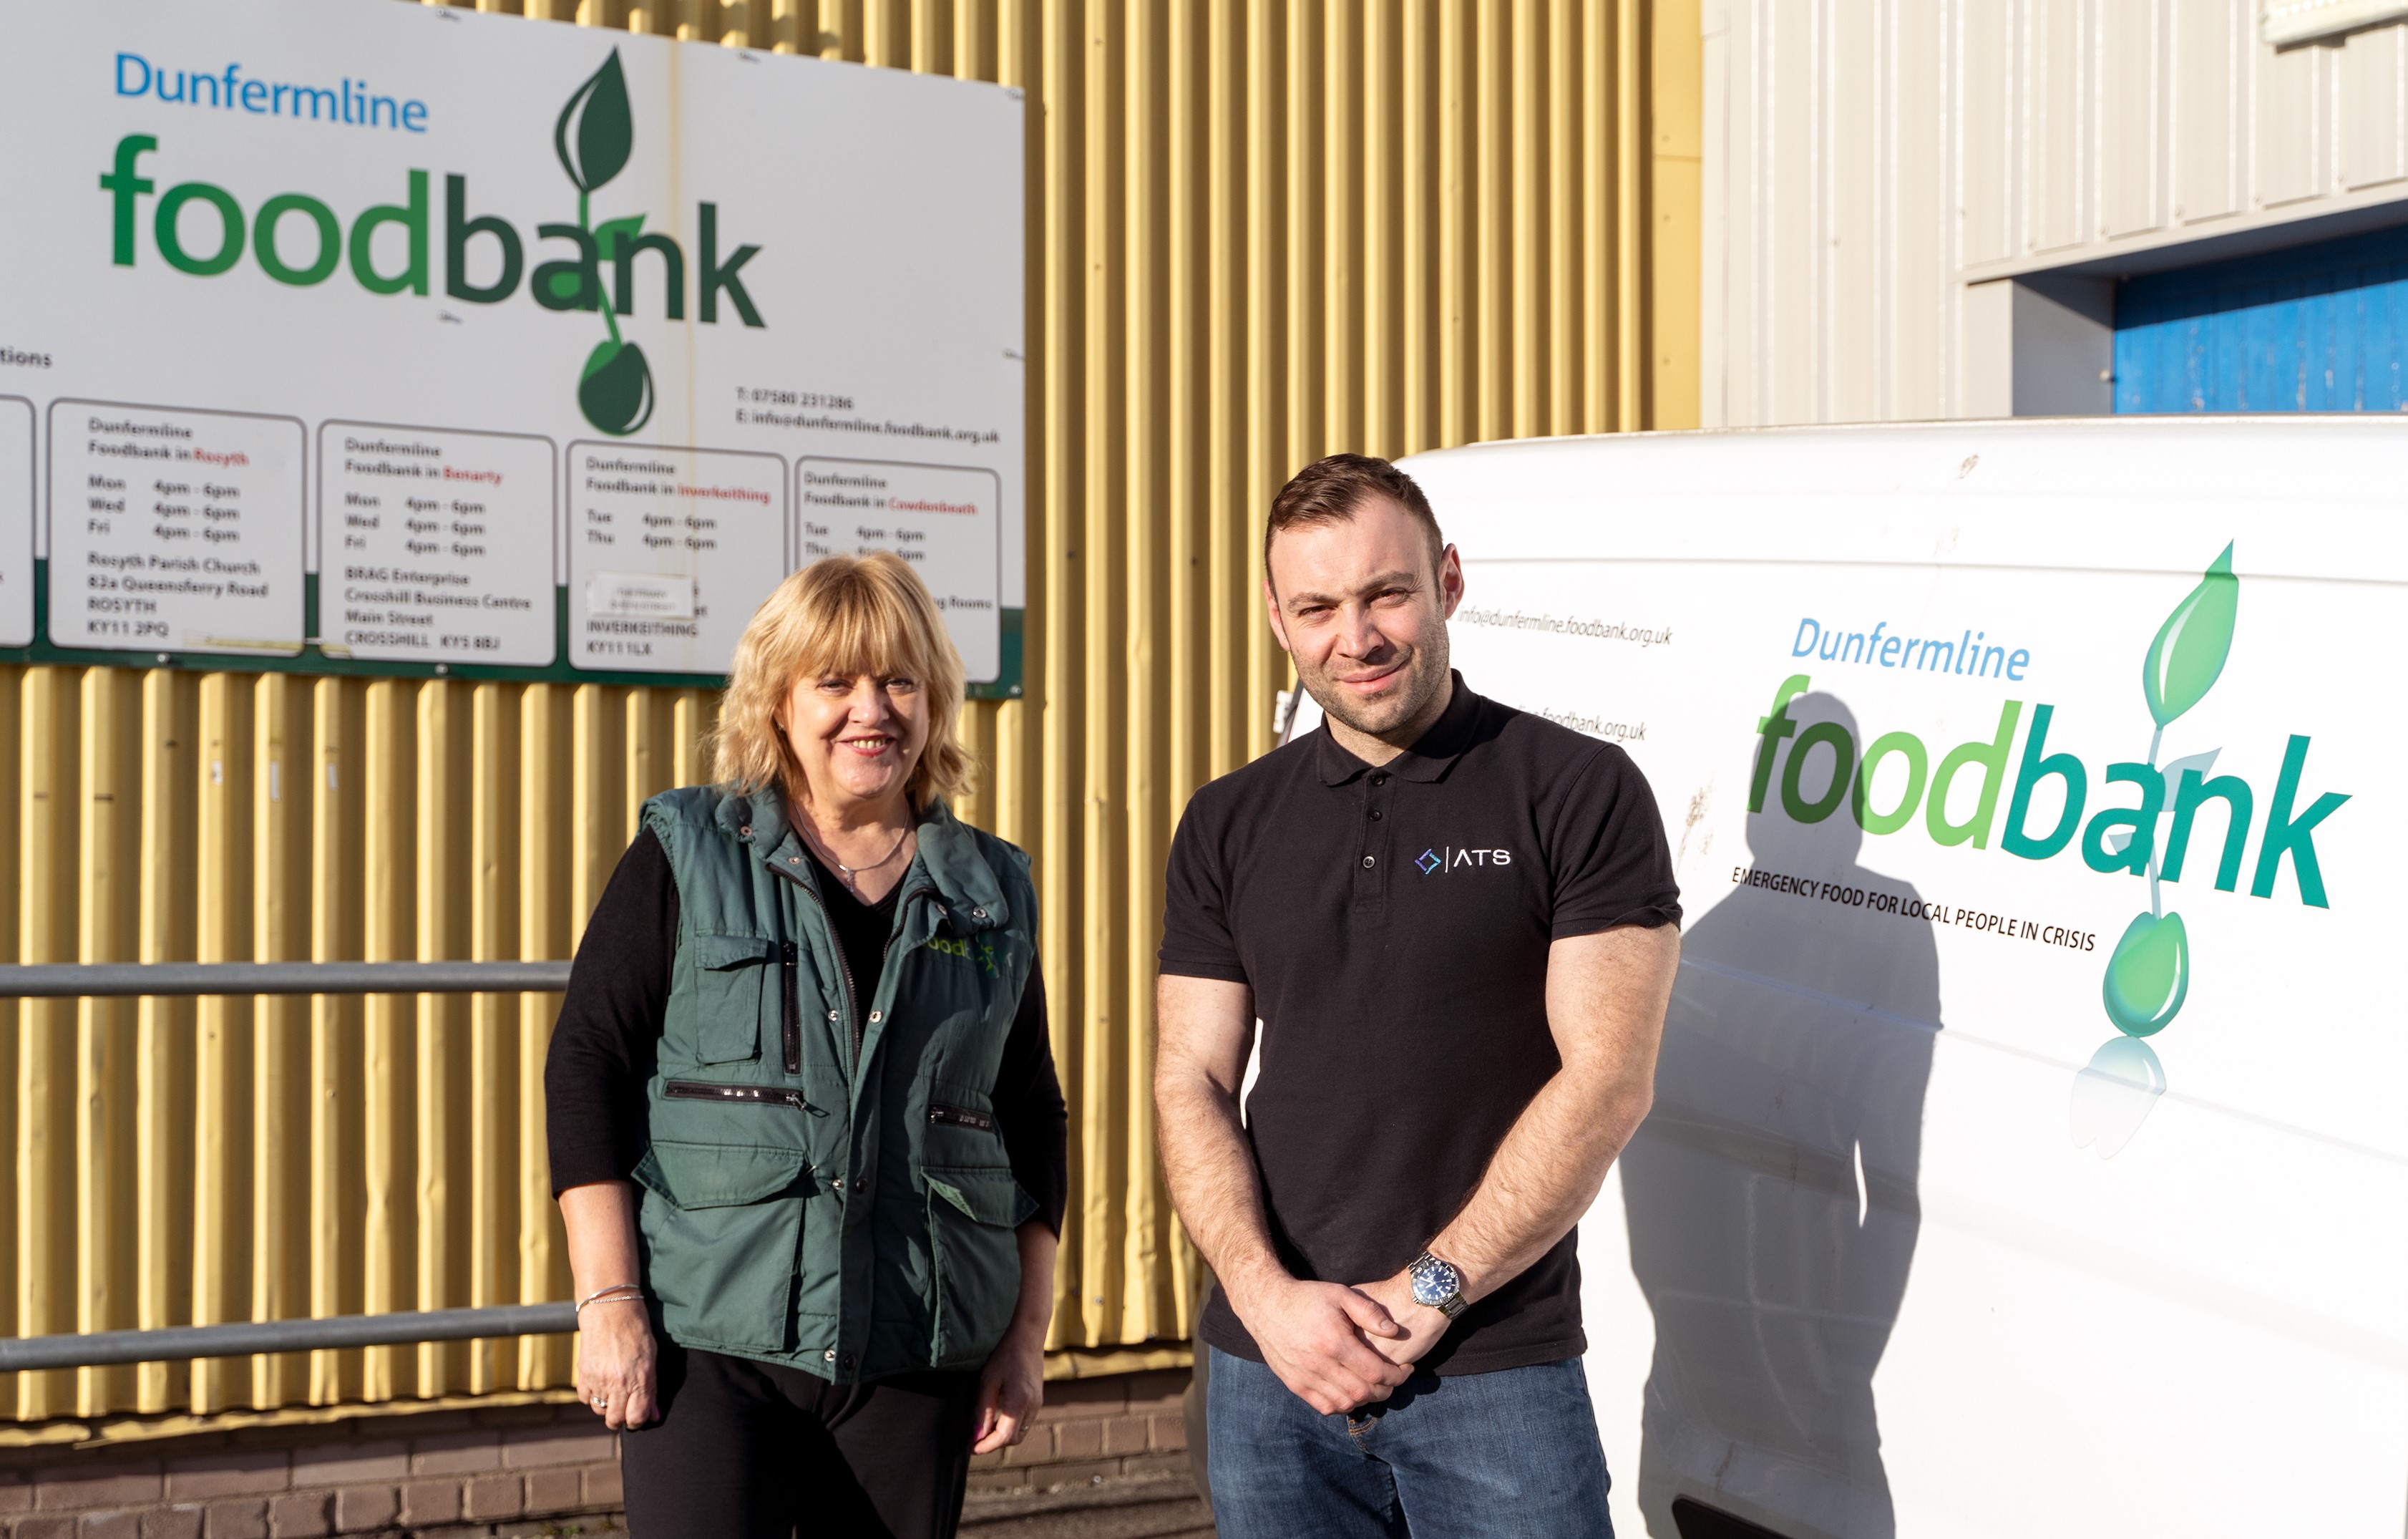 Advanced Traditional Screeding commits £6k a year to Dunfermline Foodbank